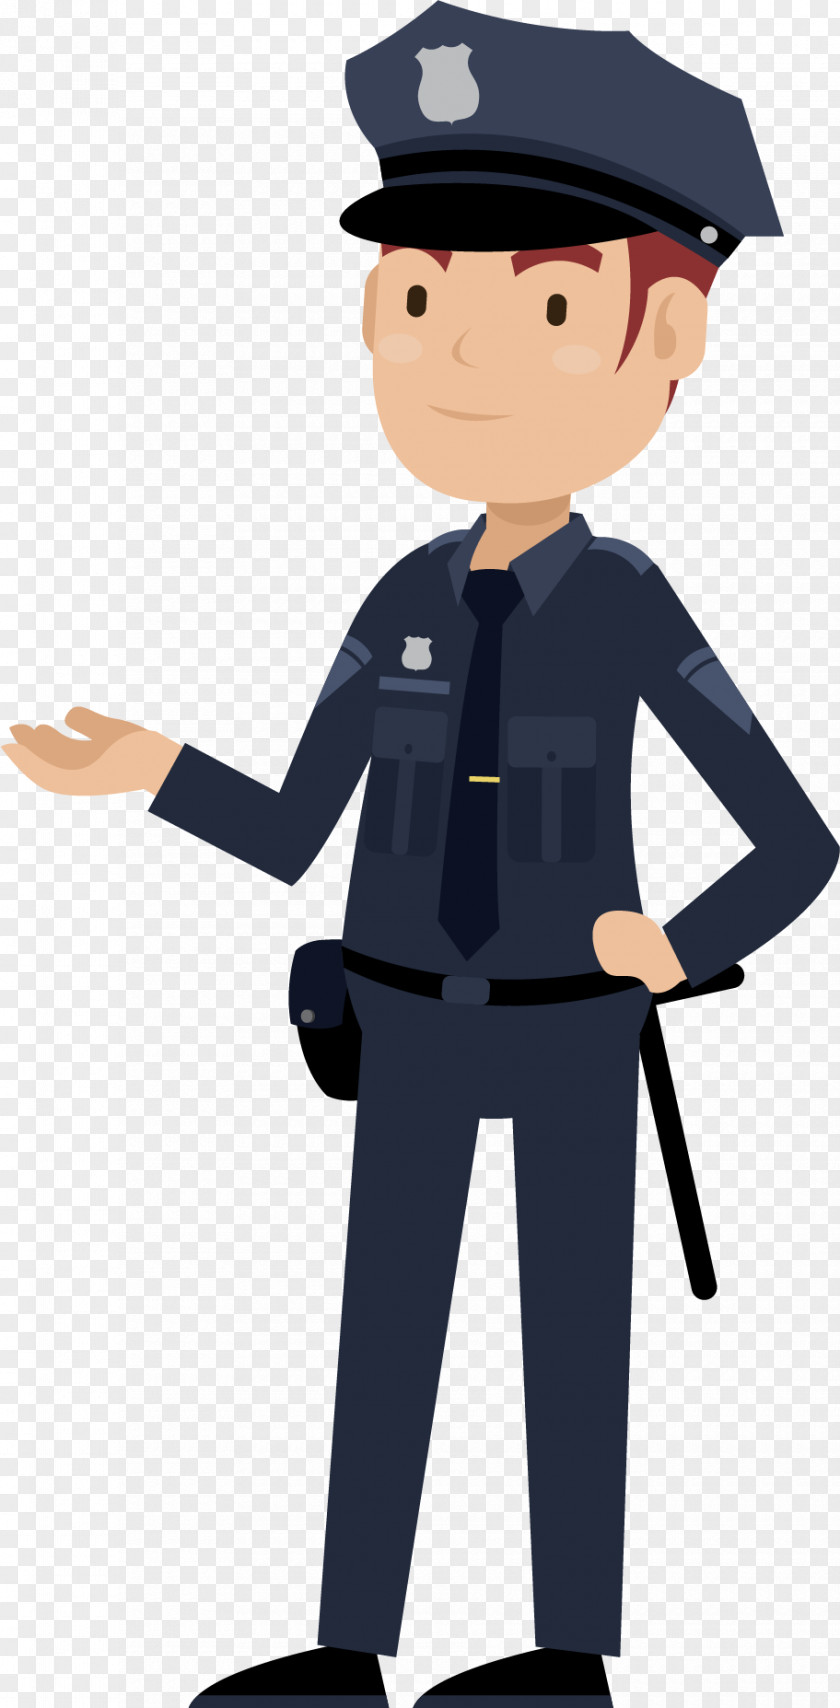 Cartoon Police Officer Public Security Crime PNG